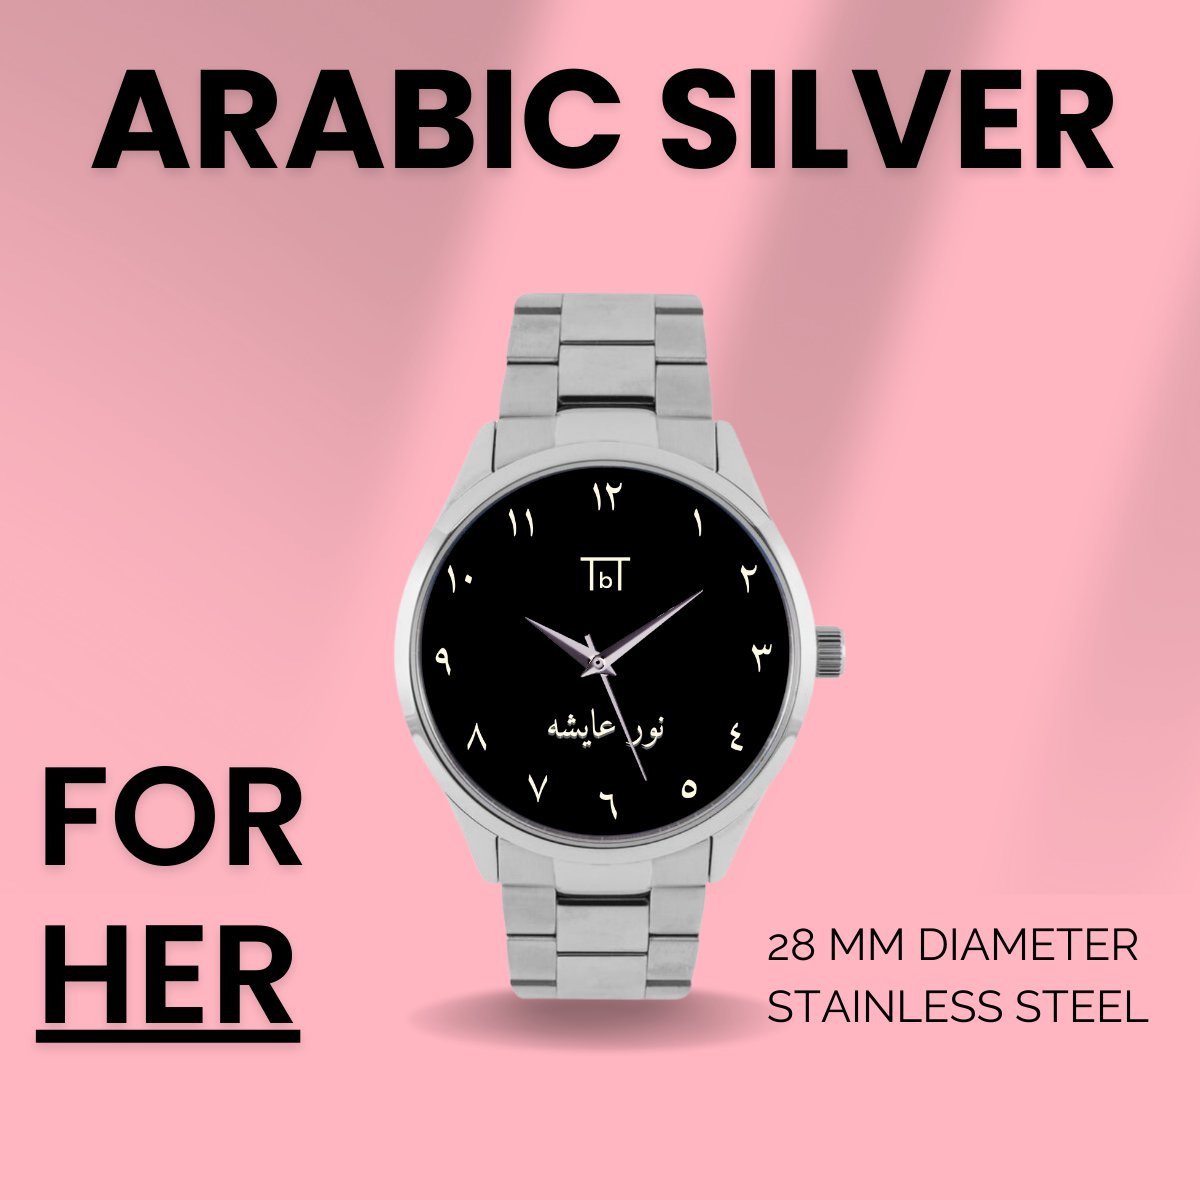 Arabic Dial Watch in Silver Stainless Steel FOR HER - TbT WatchesTbT Watches